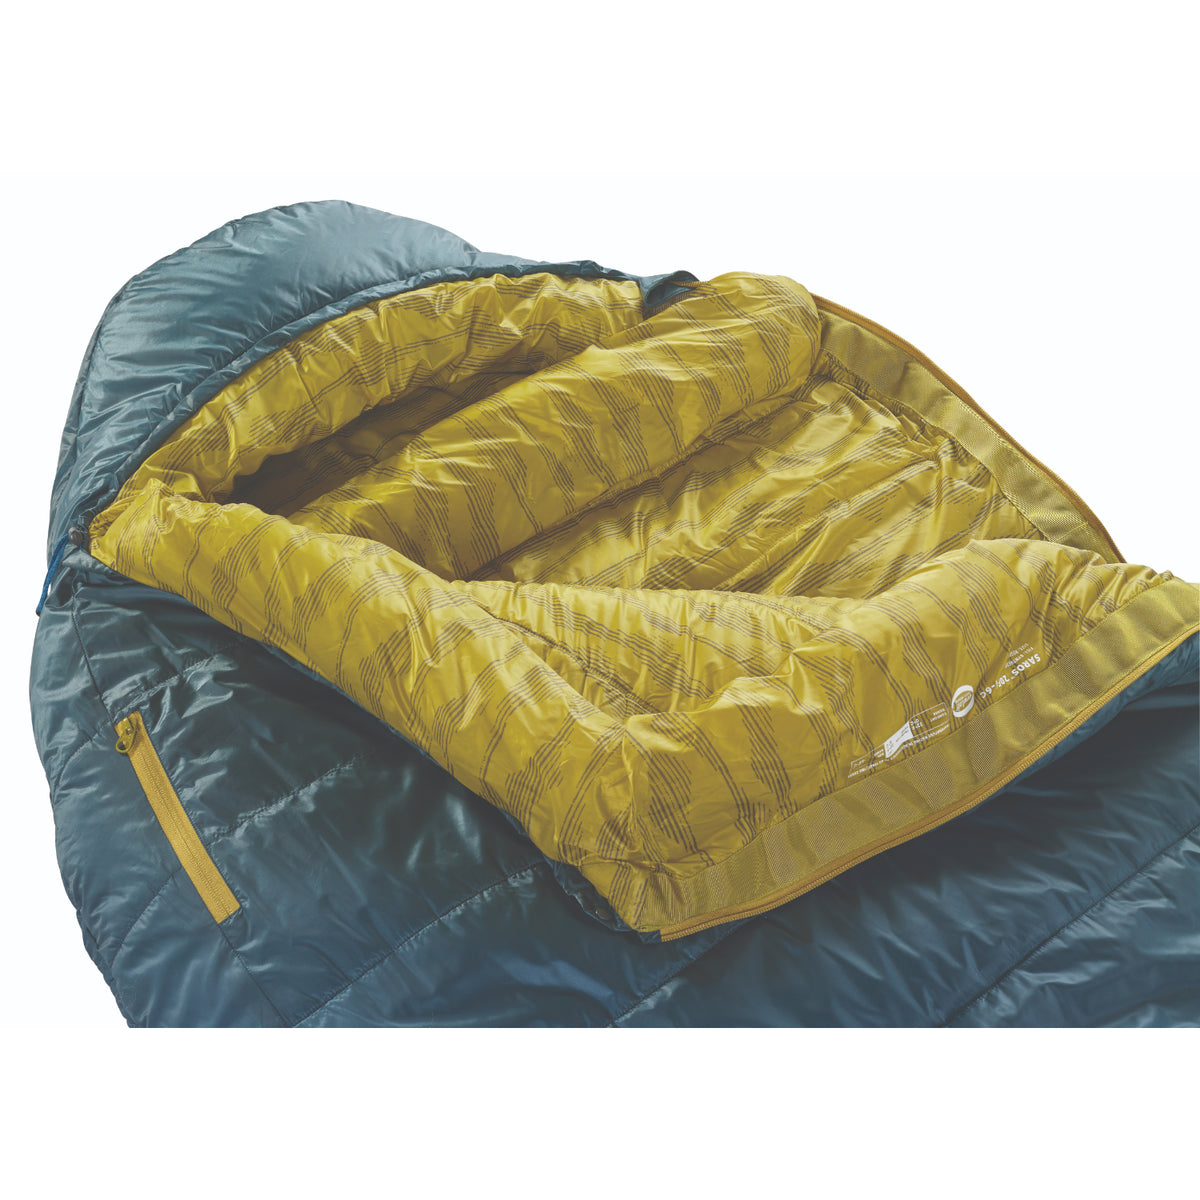 Thermarest Saros 20F/-6C synthetic sleeping bag in stargazer colour